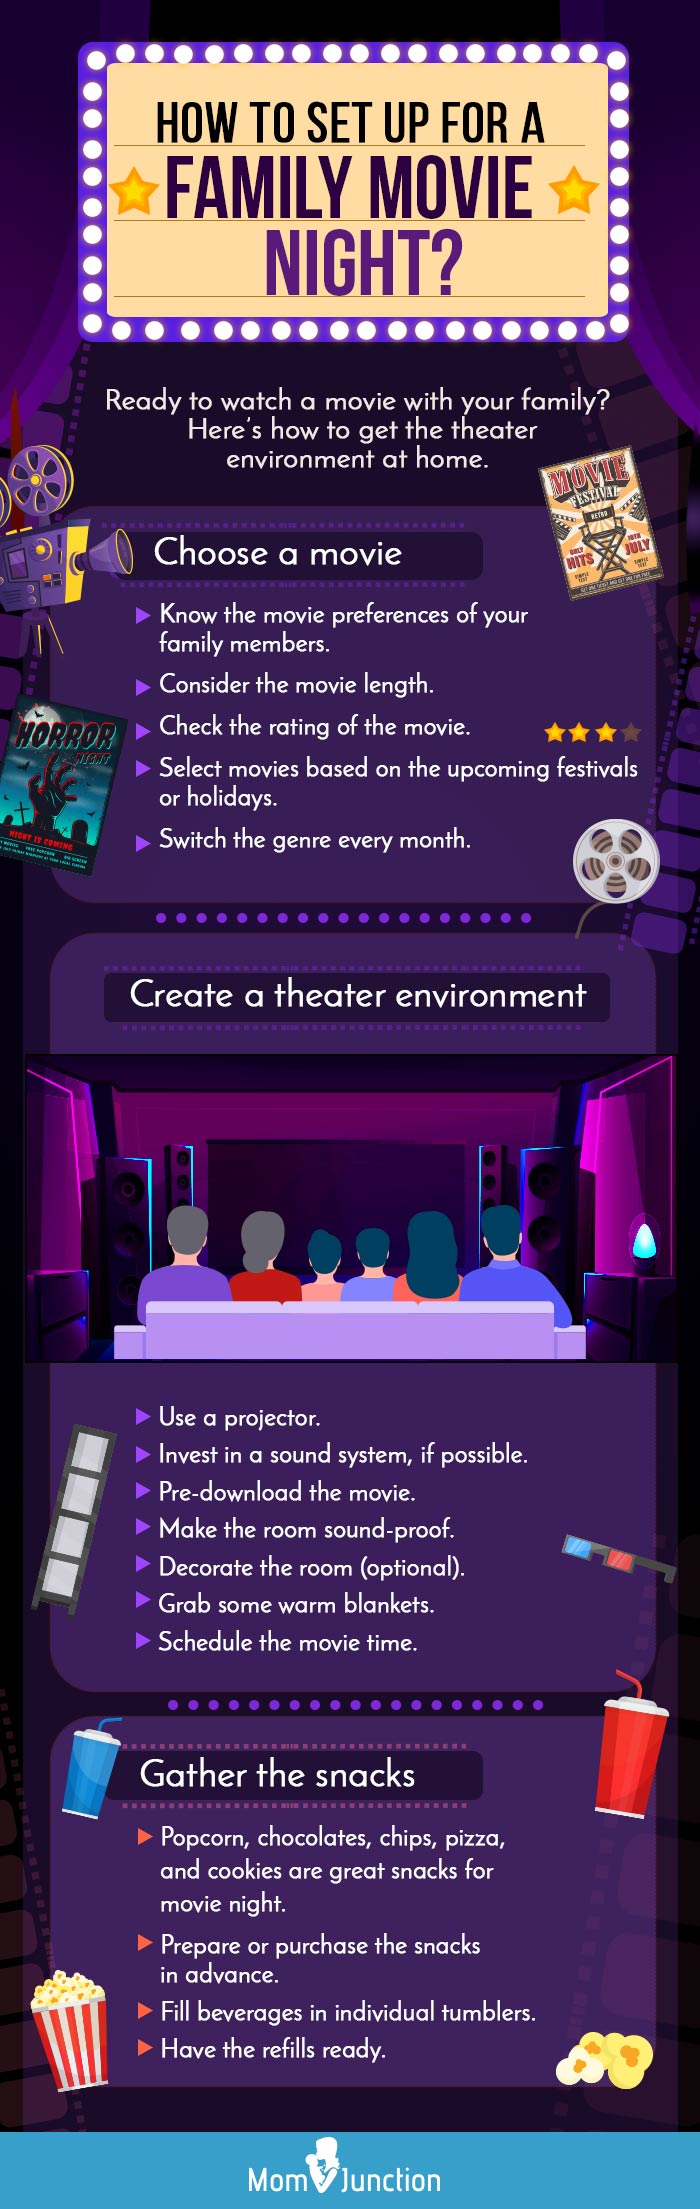 how to set up for a family movie night [infographic]